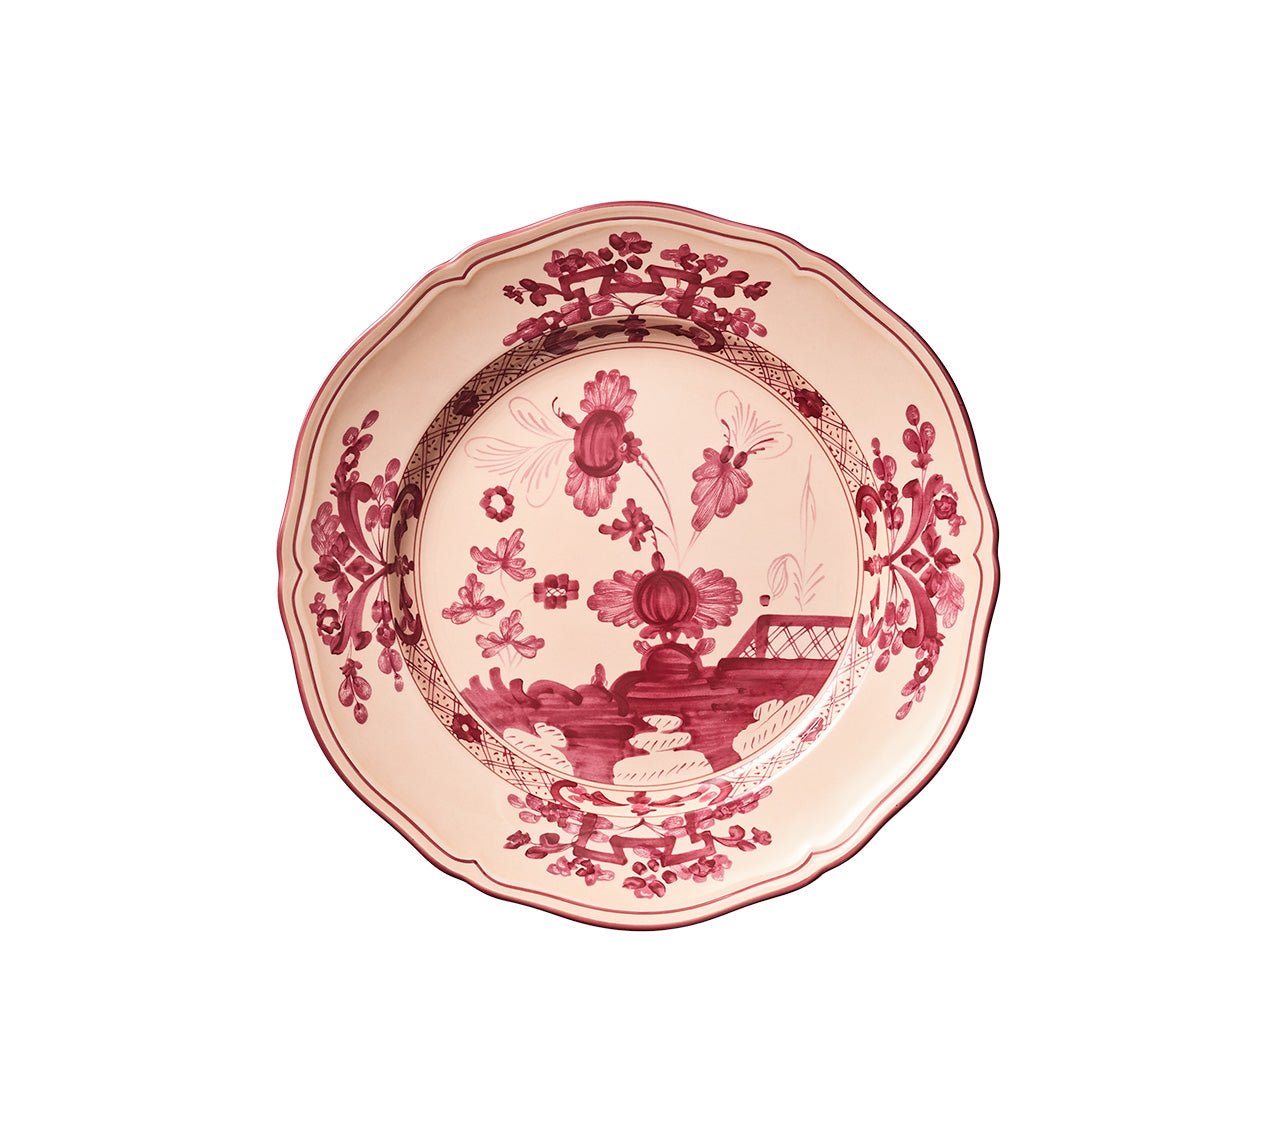 Oriente Italiano Salad Plate with red carnation motif